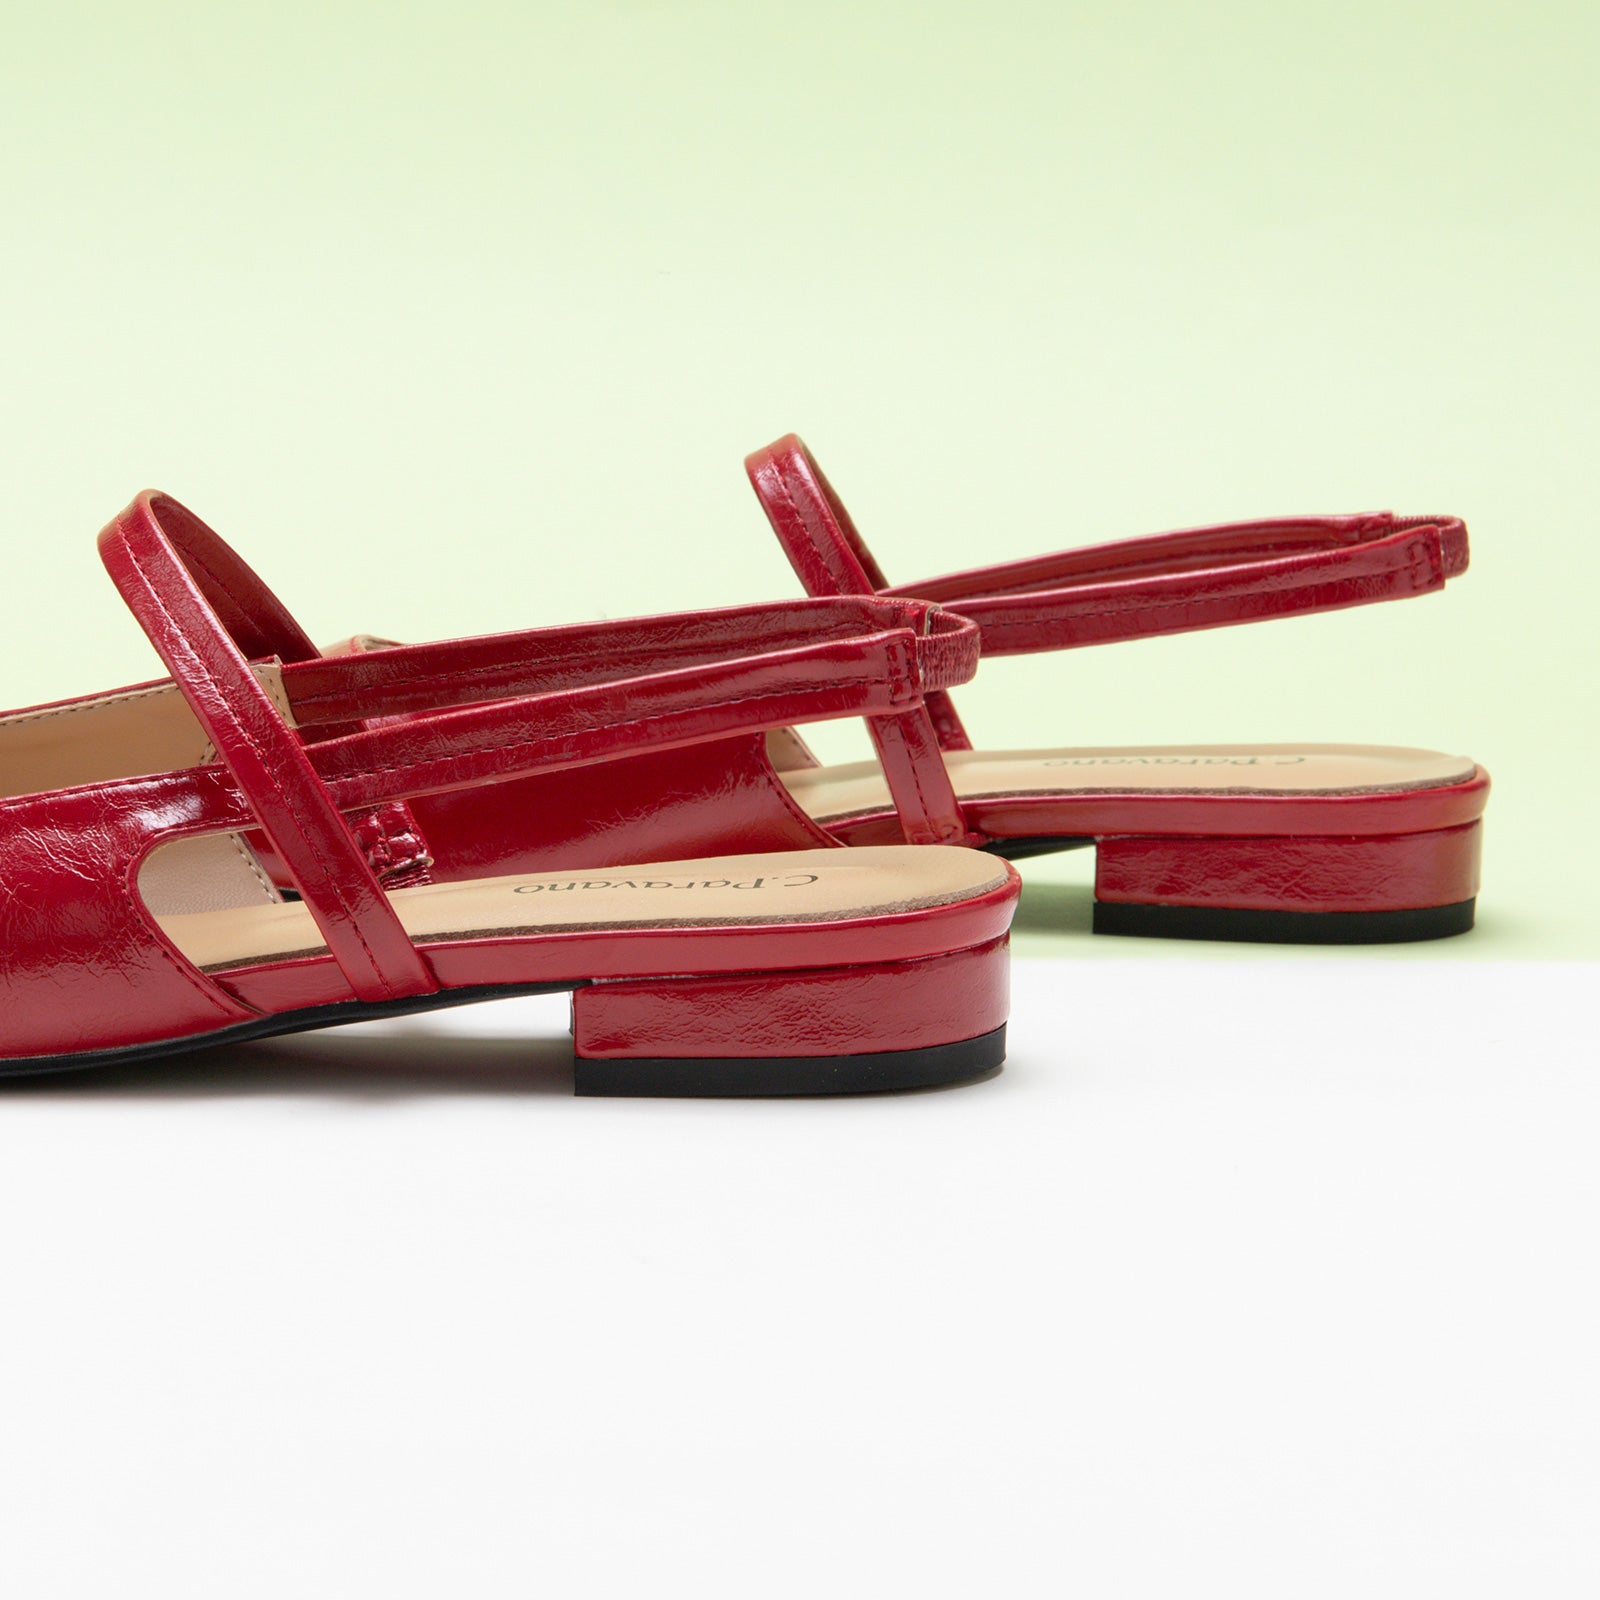 Red Strappy Slingback Flats with a pointed toe, adding a touch of modernity to your ensemble in a striking hue